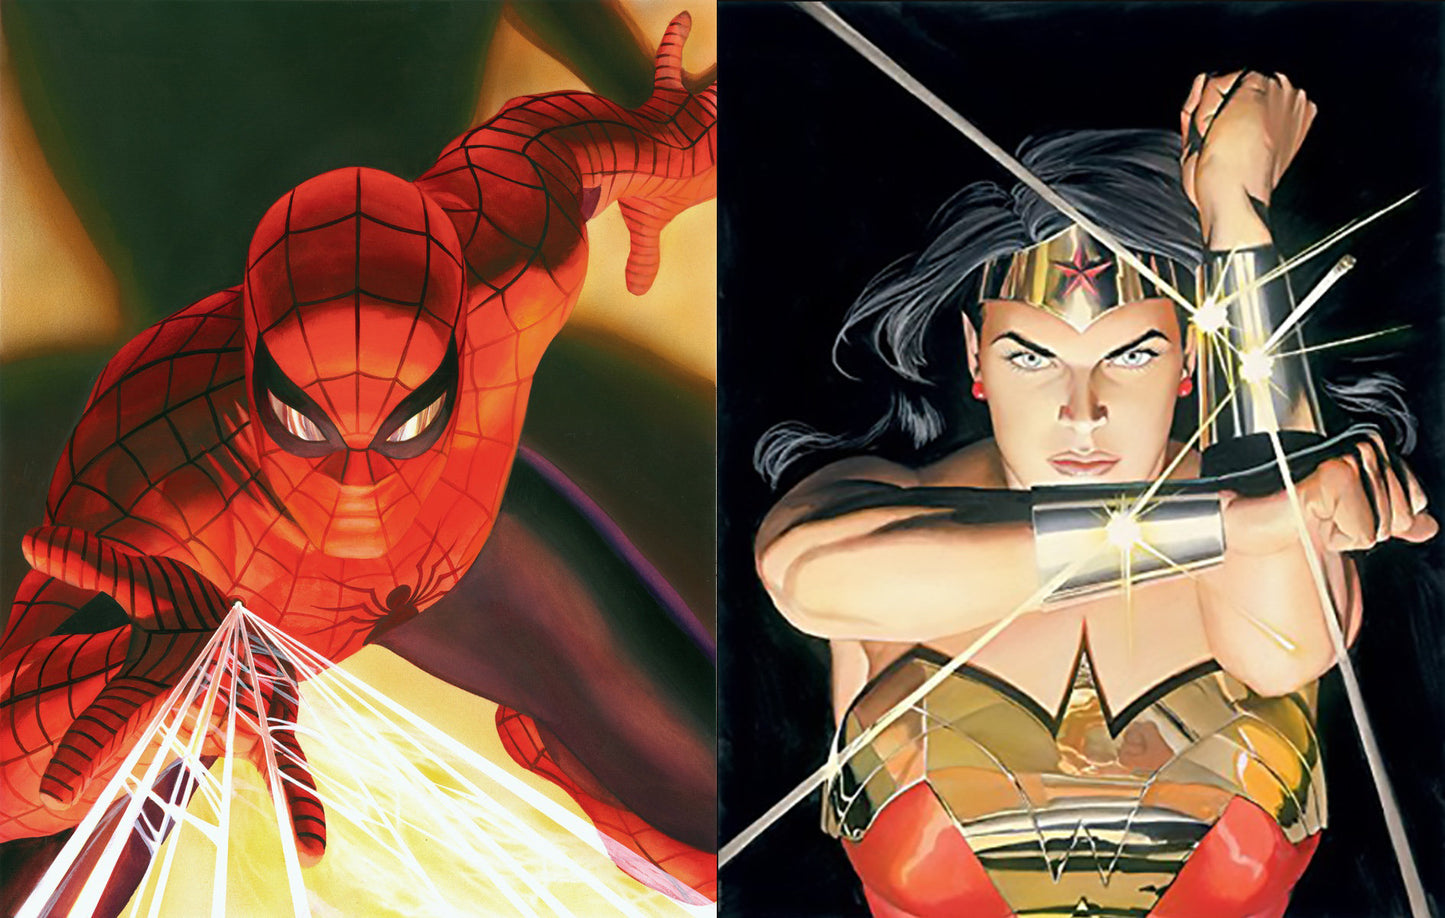 Alex Ross 2 LOT Spider-Man and Wonder Woman SDCC Exclusive Matted Lithographs on Paper - Each a Limited Edition of 250